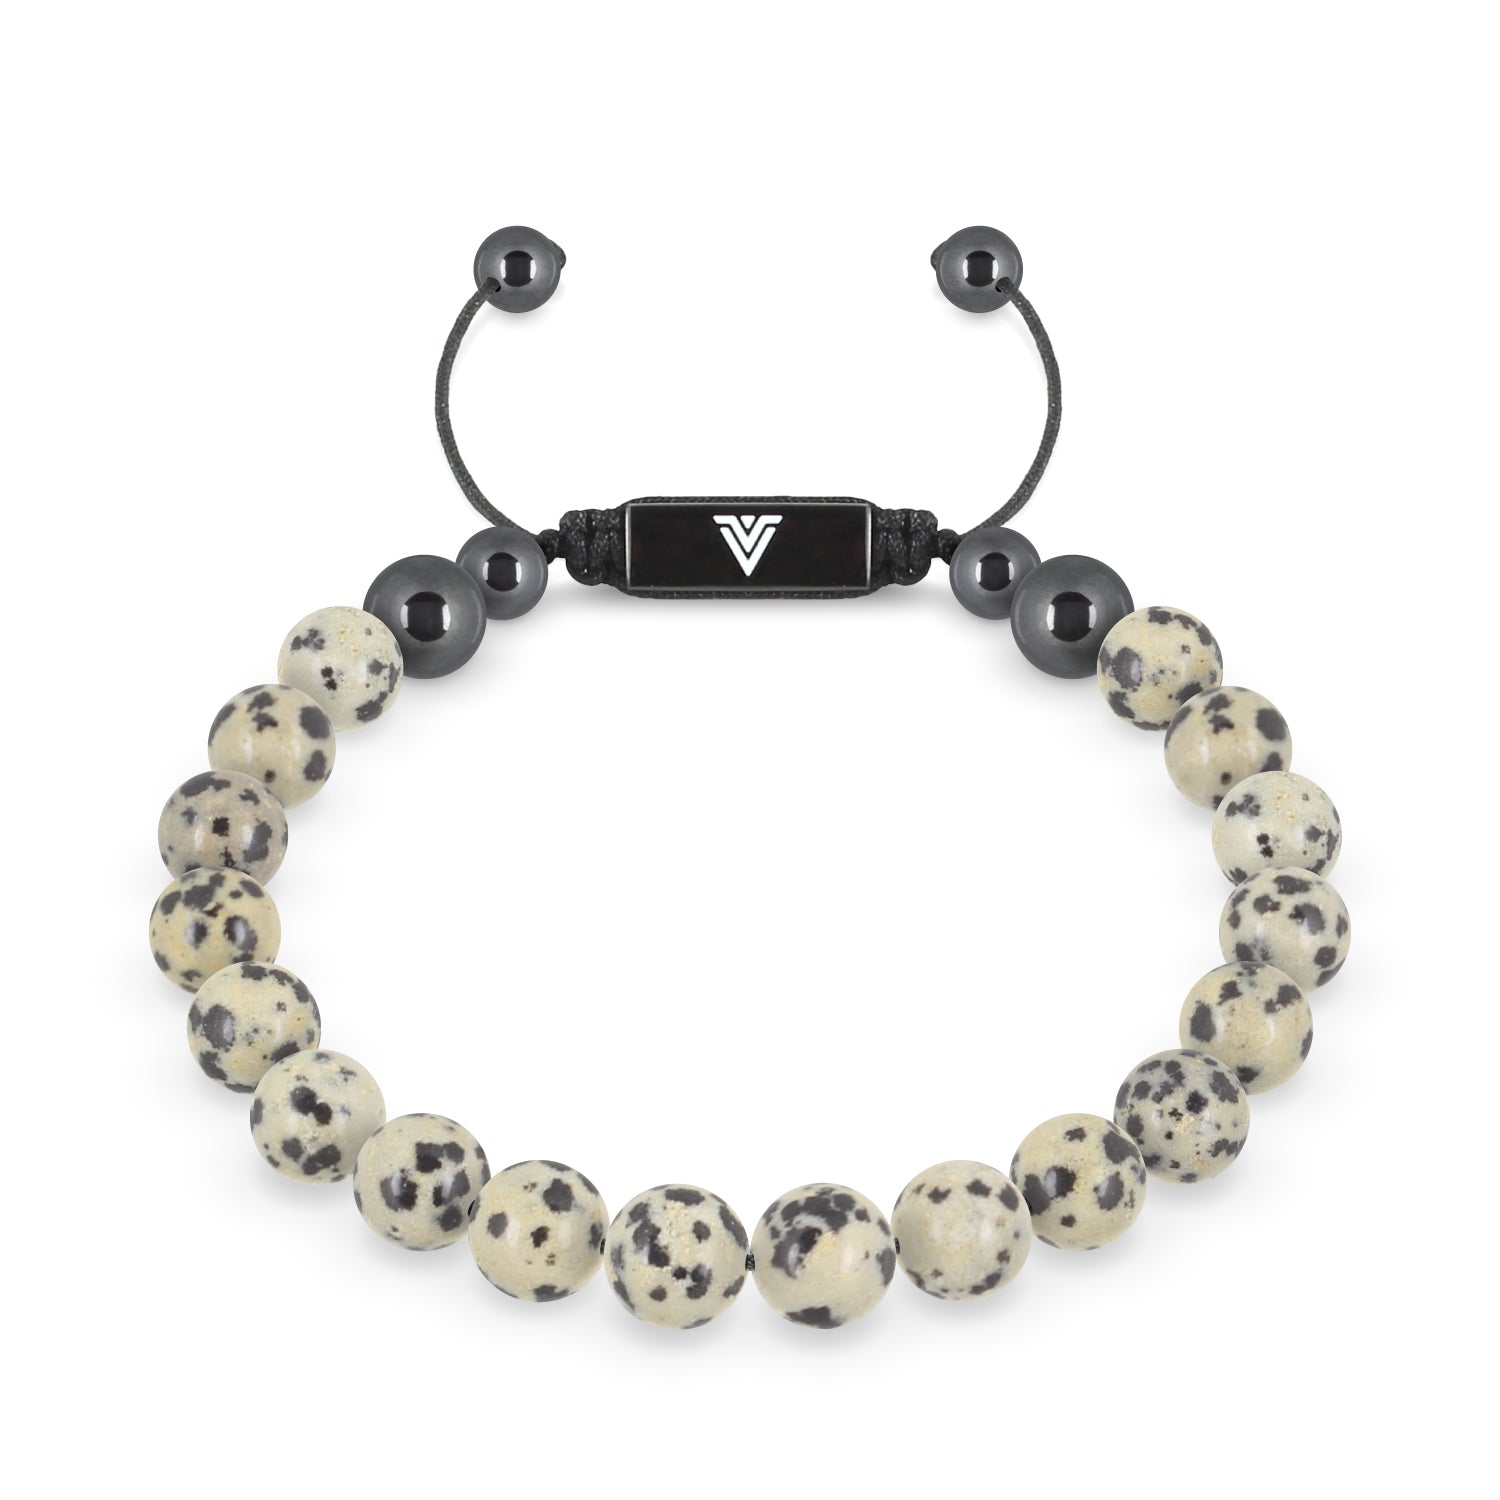 Front view of an 8mm Dalmatian Jasper crystal beaded shamballa bracelet with black stainless steel logo bead made by Voltlin